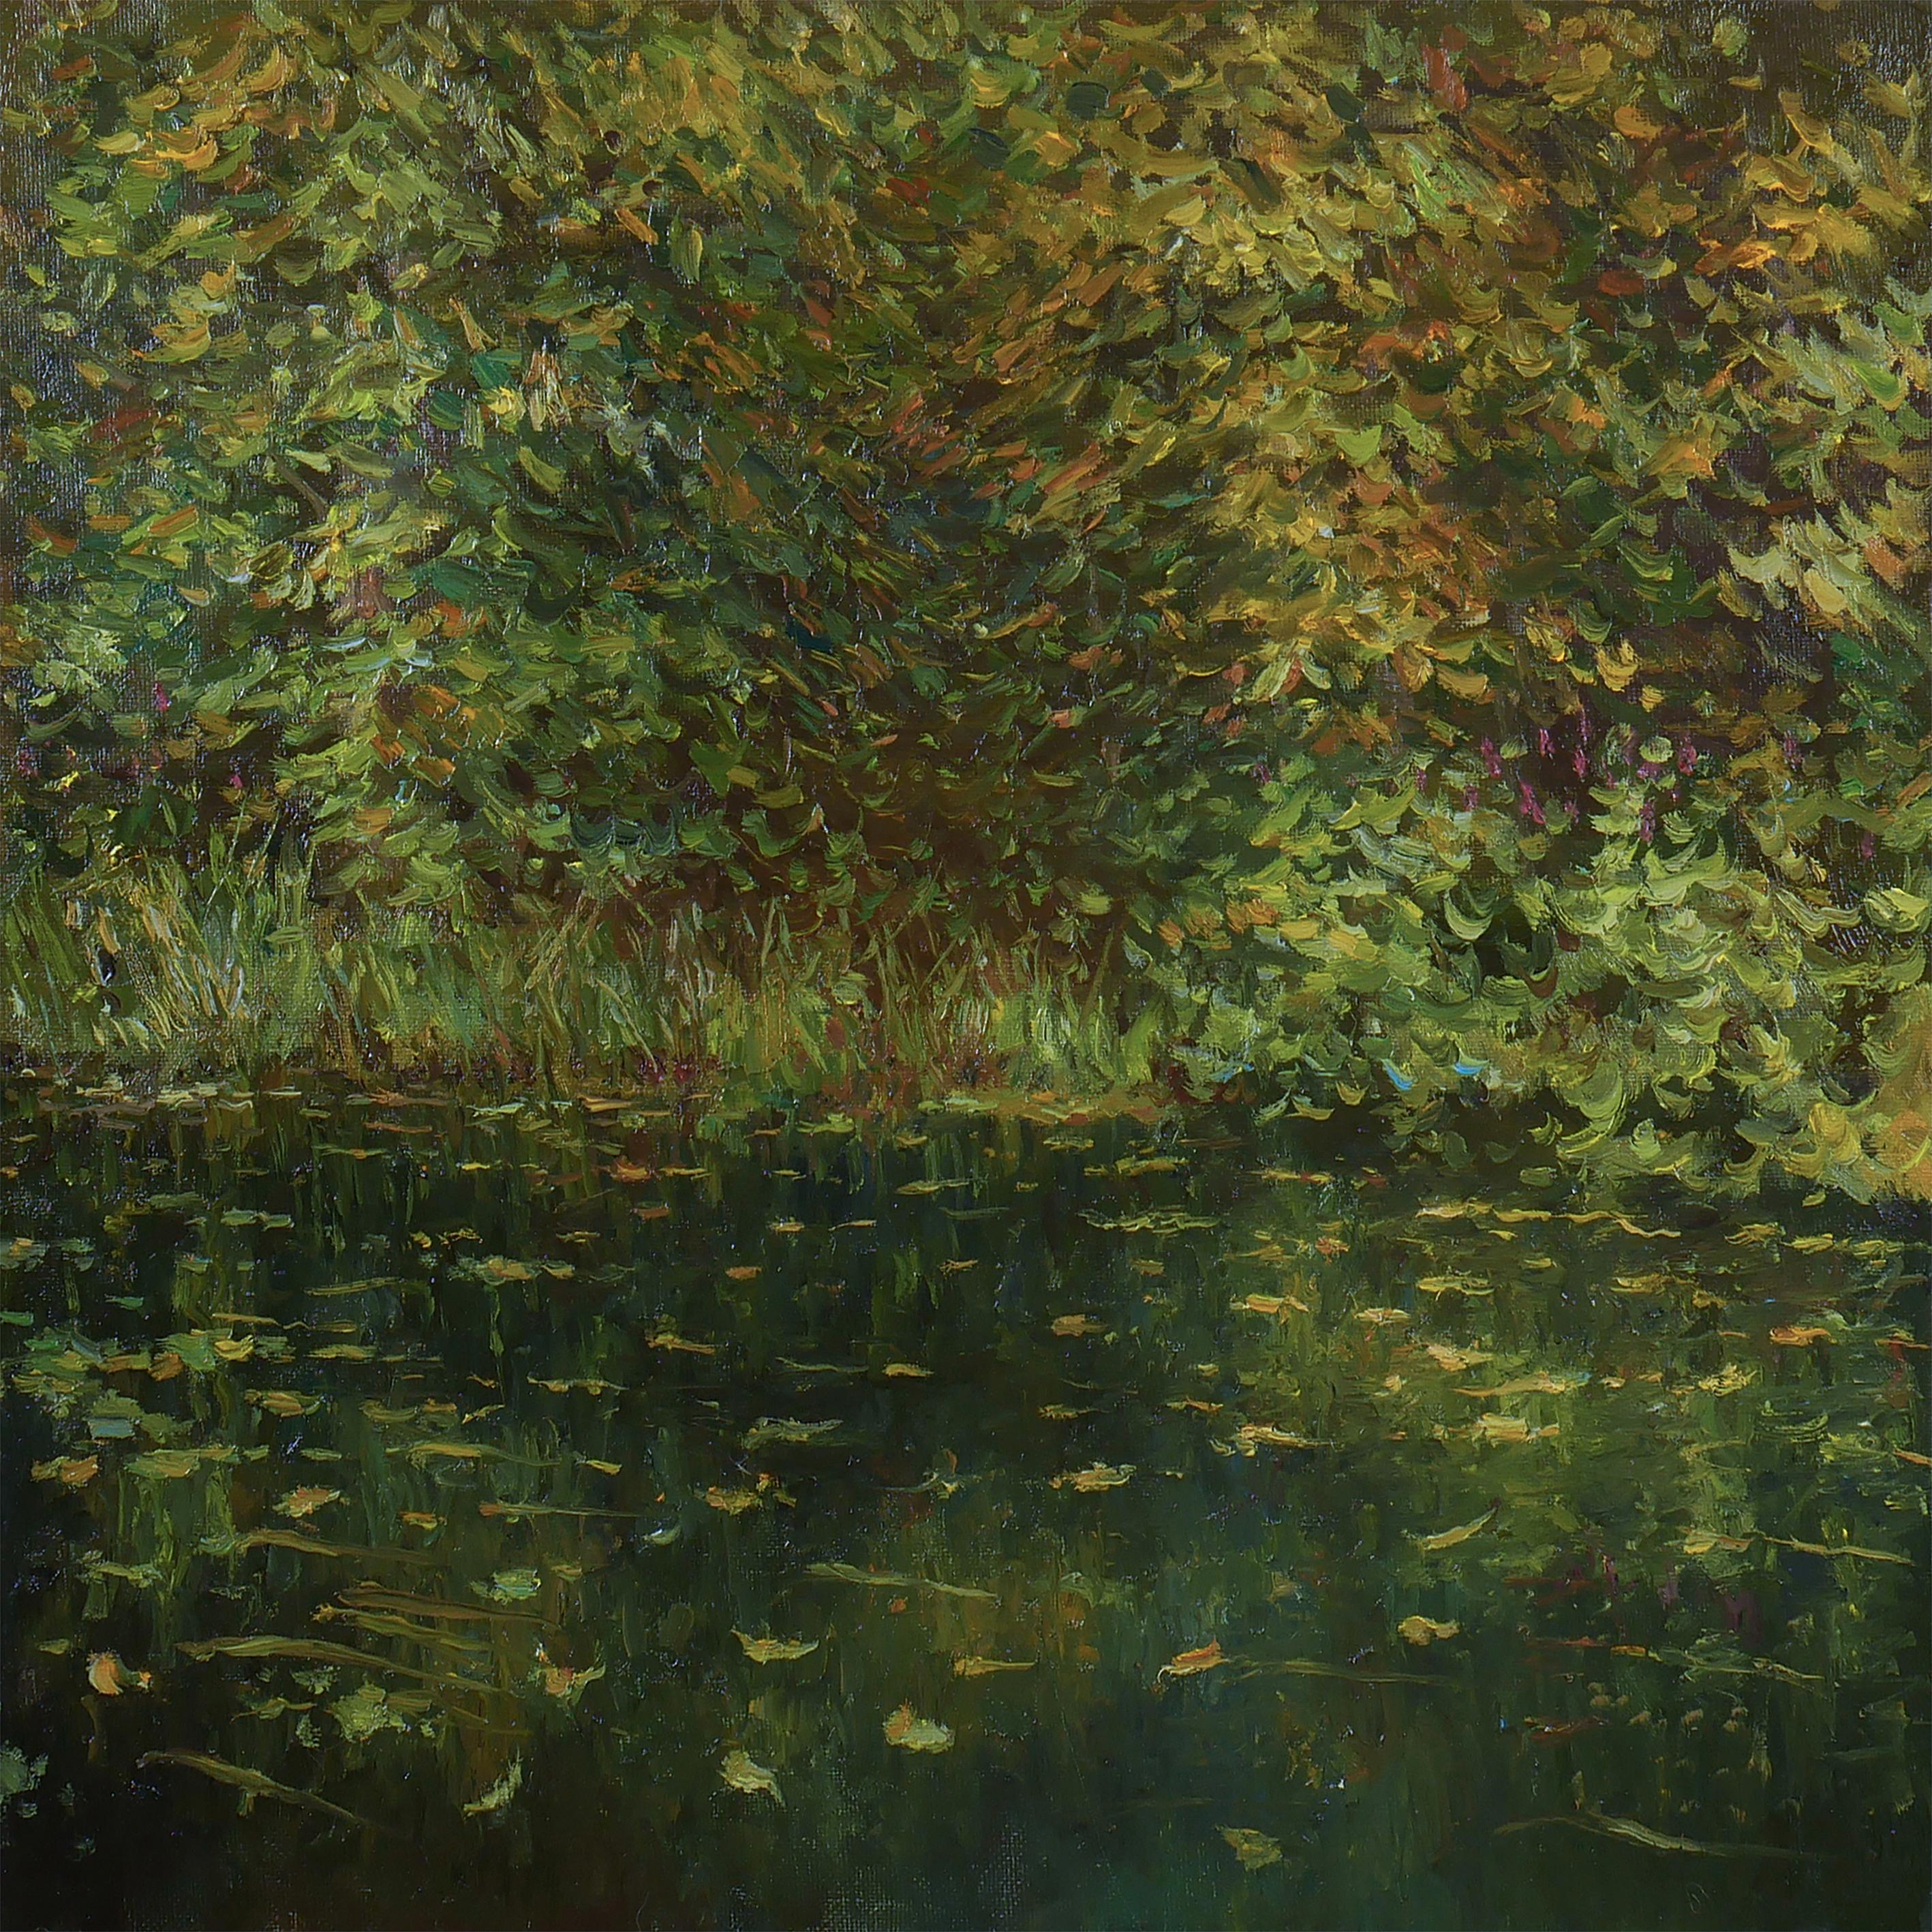 The Autumn Backwater - sunny river landscape painting